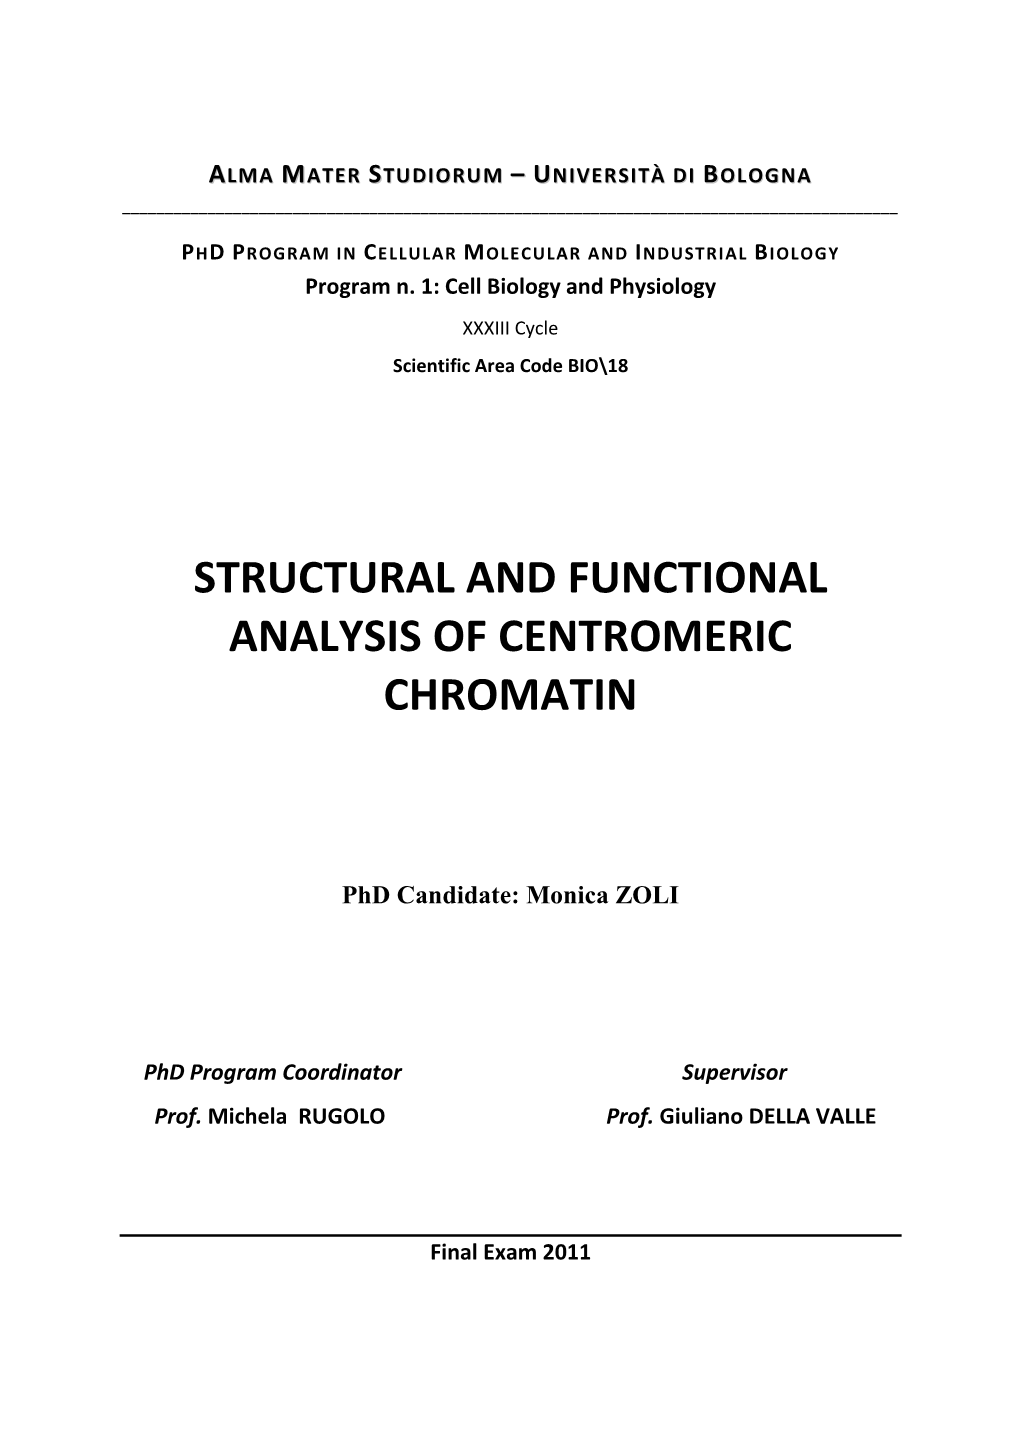 Structural and Functional Analysis of Centromeric Chromatin